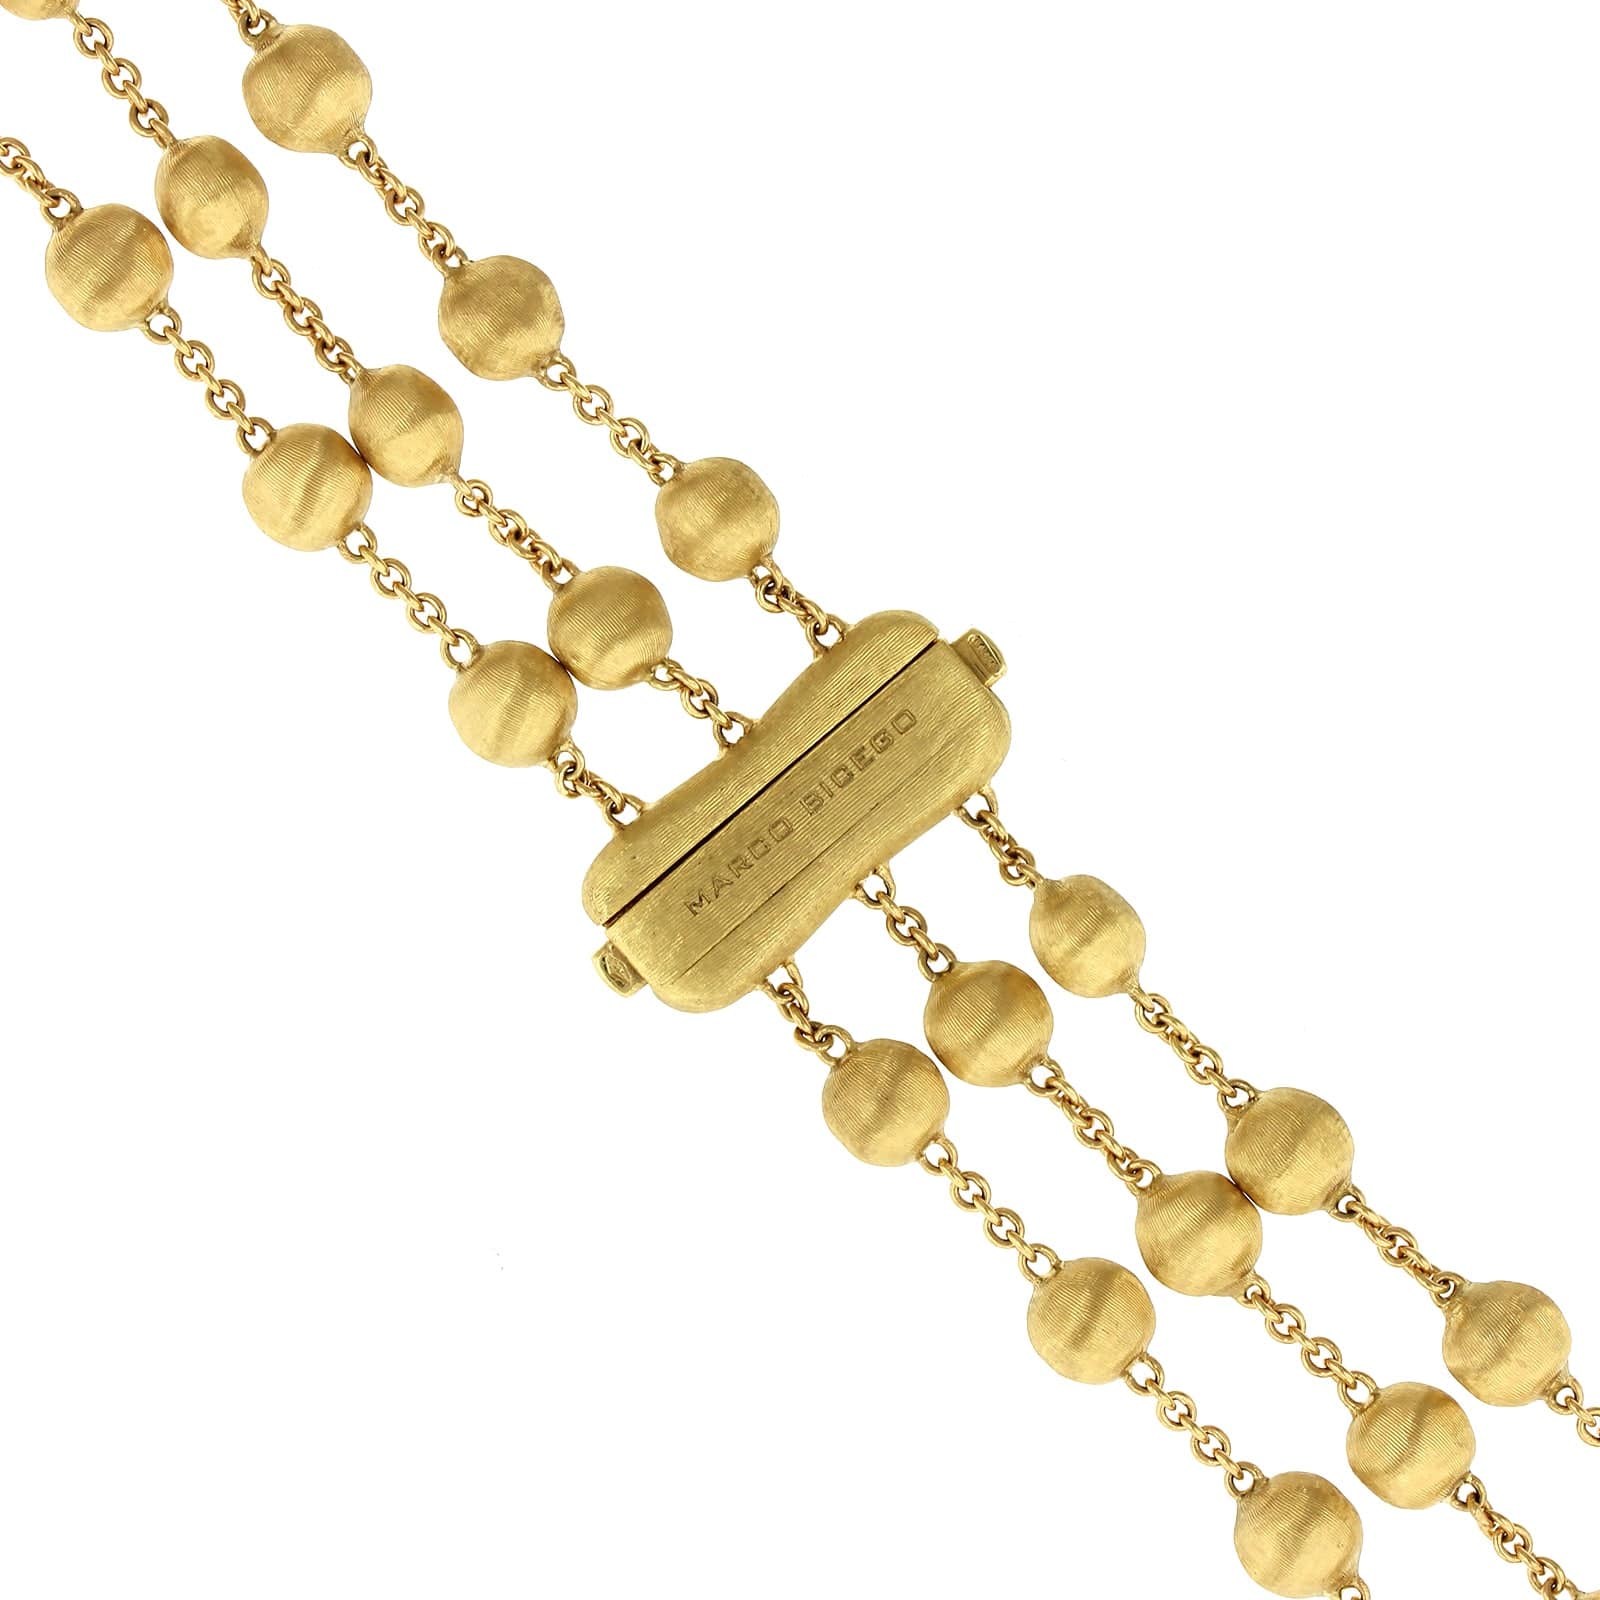 Marco Bicego Africa 18K Yellow Gold Turquoise Bead Necklace